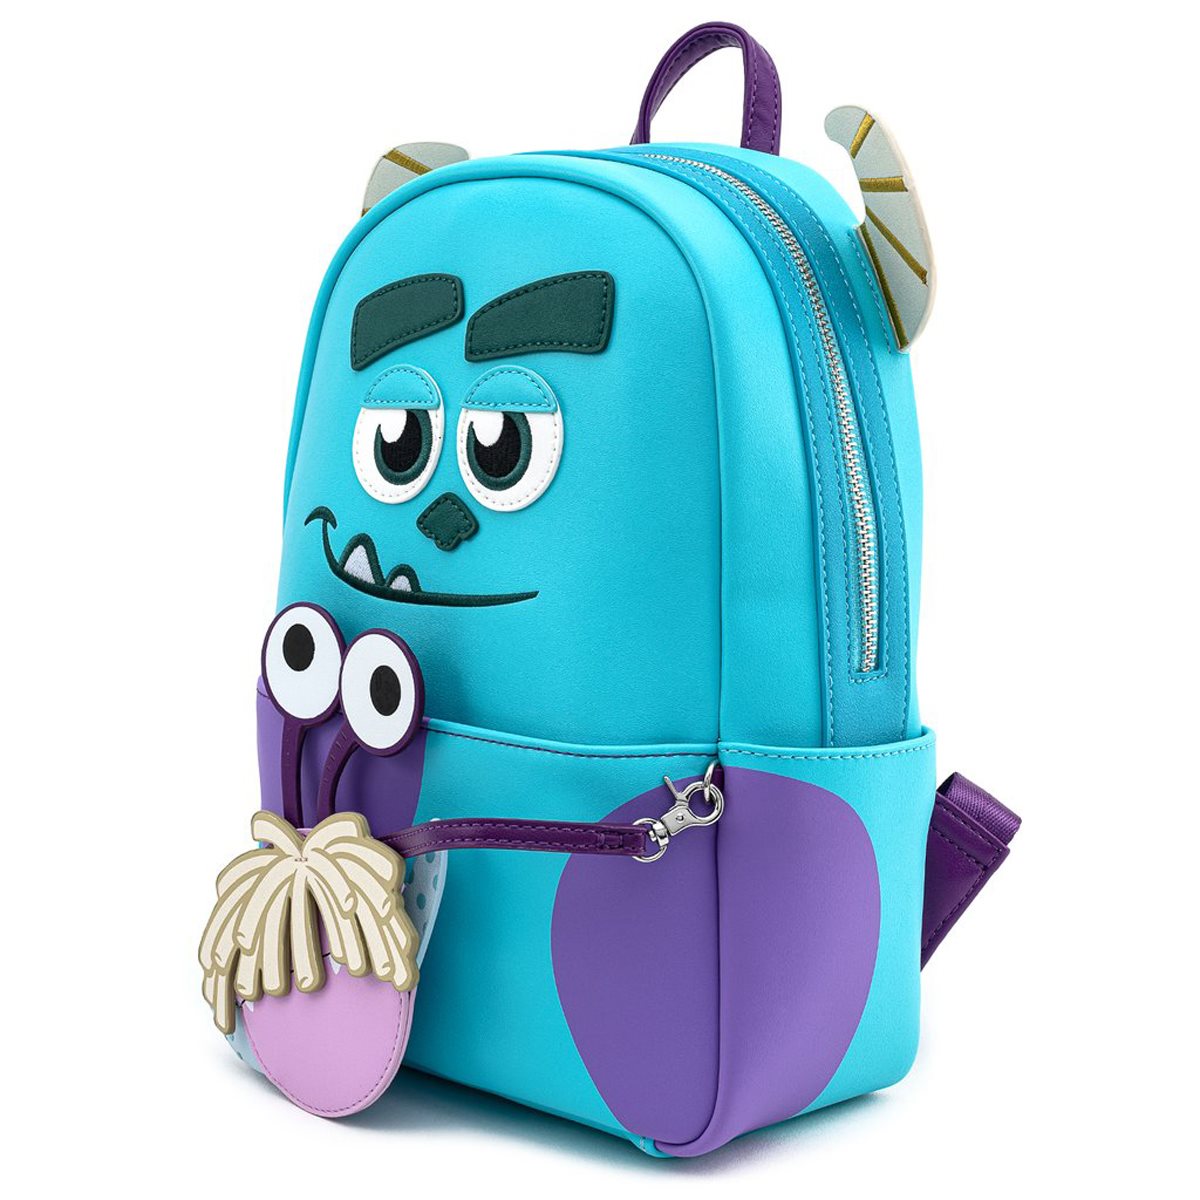 Boo Mike Sully Monsters Inc. (Mini Backpack) - Pixar Loungefly